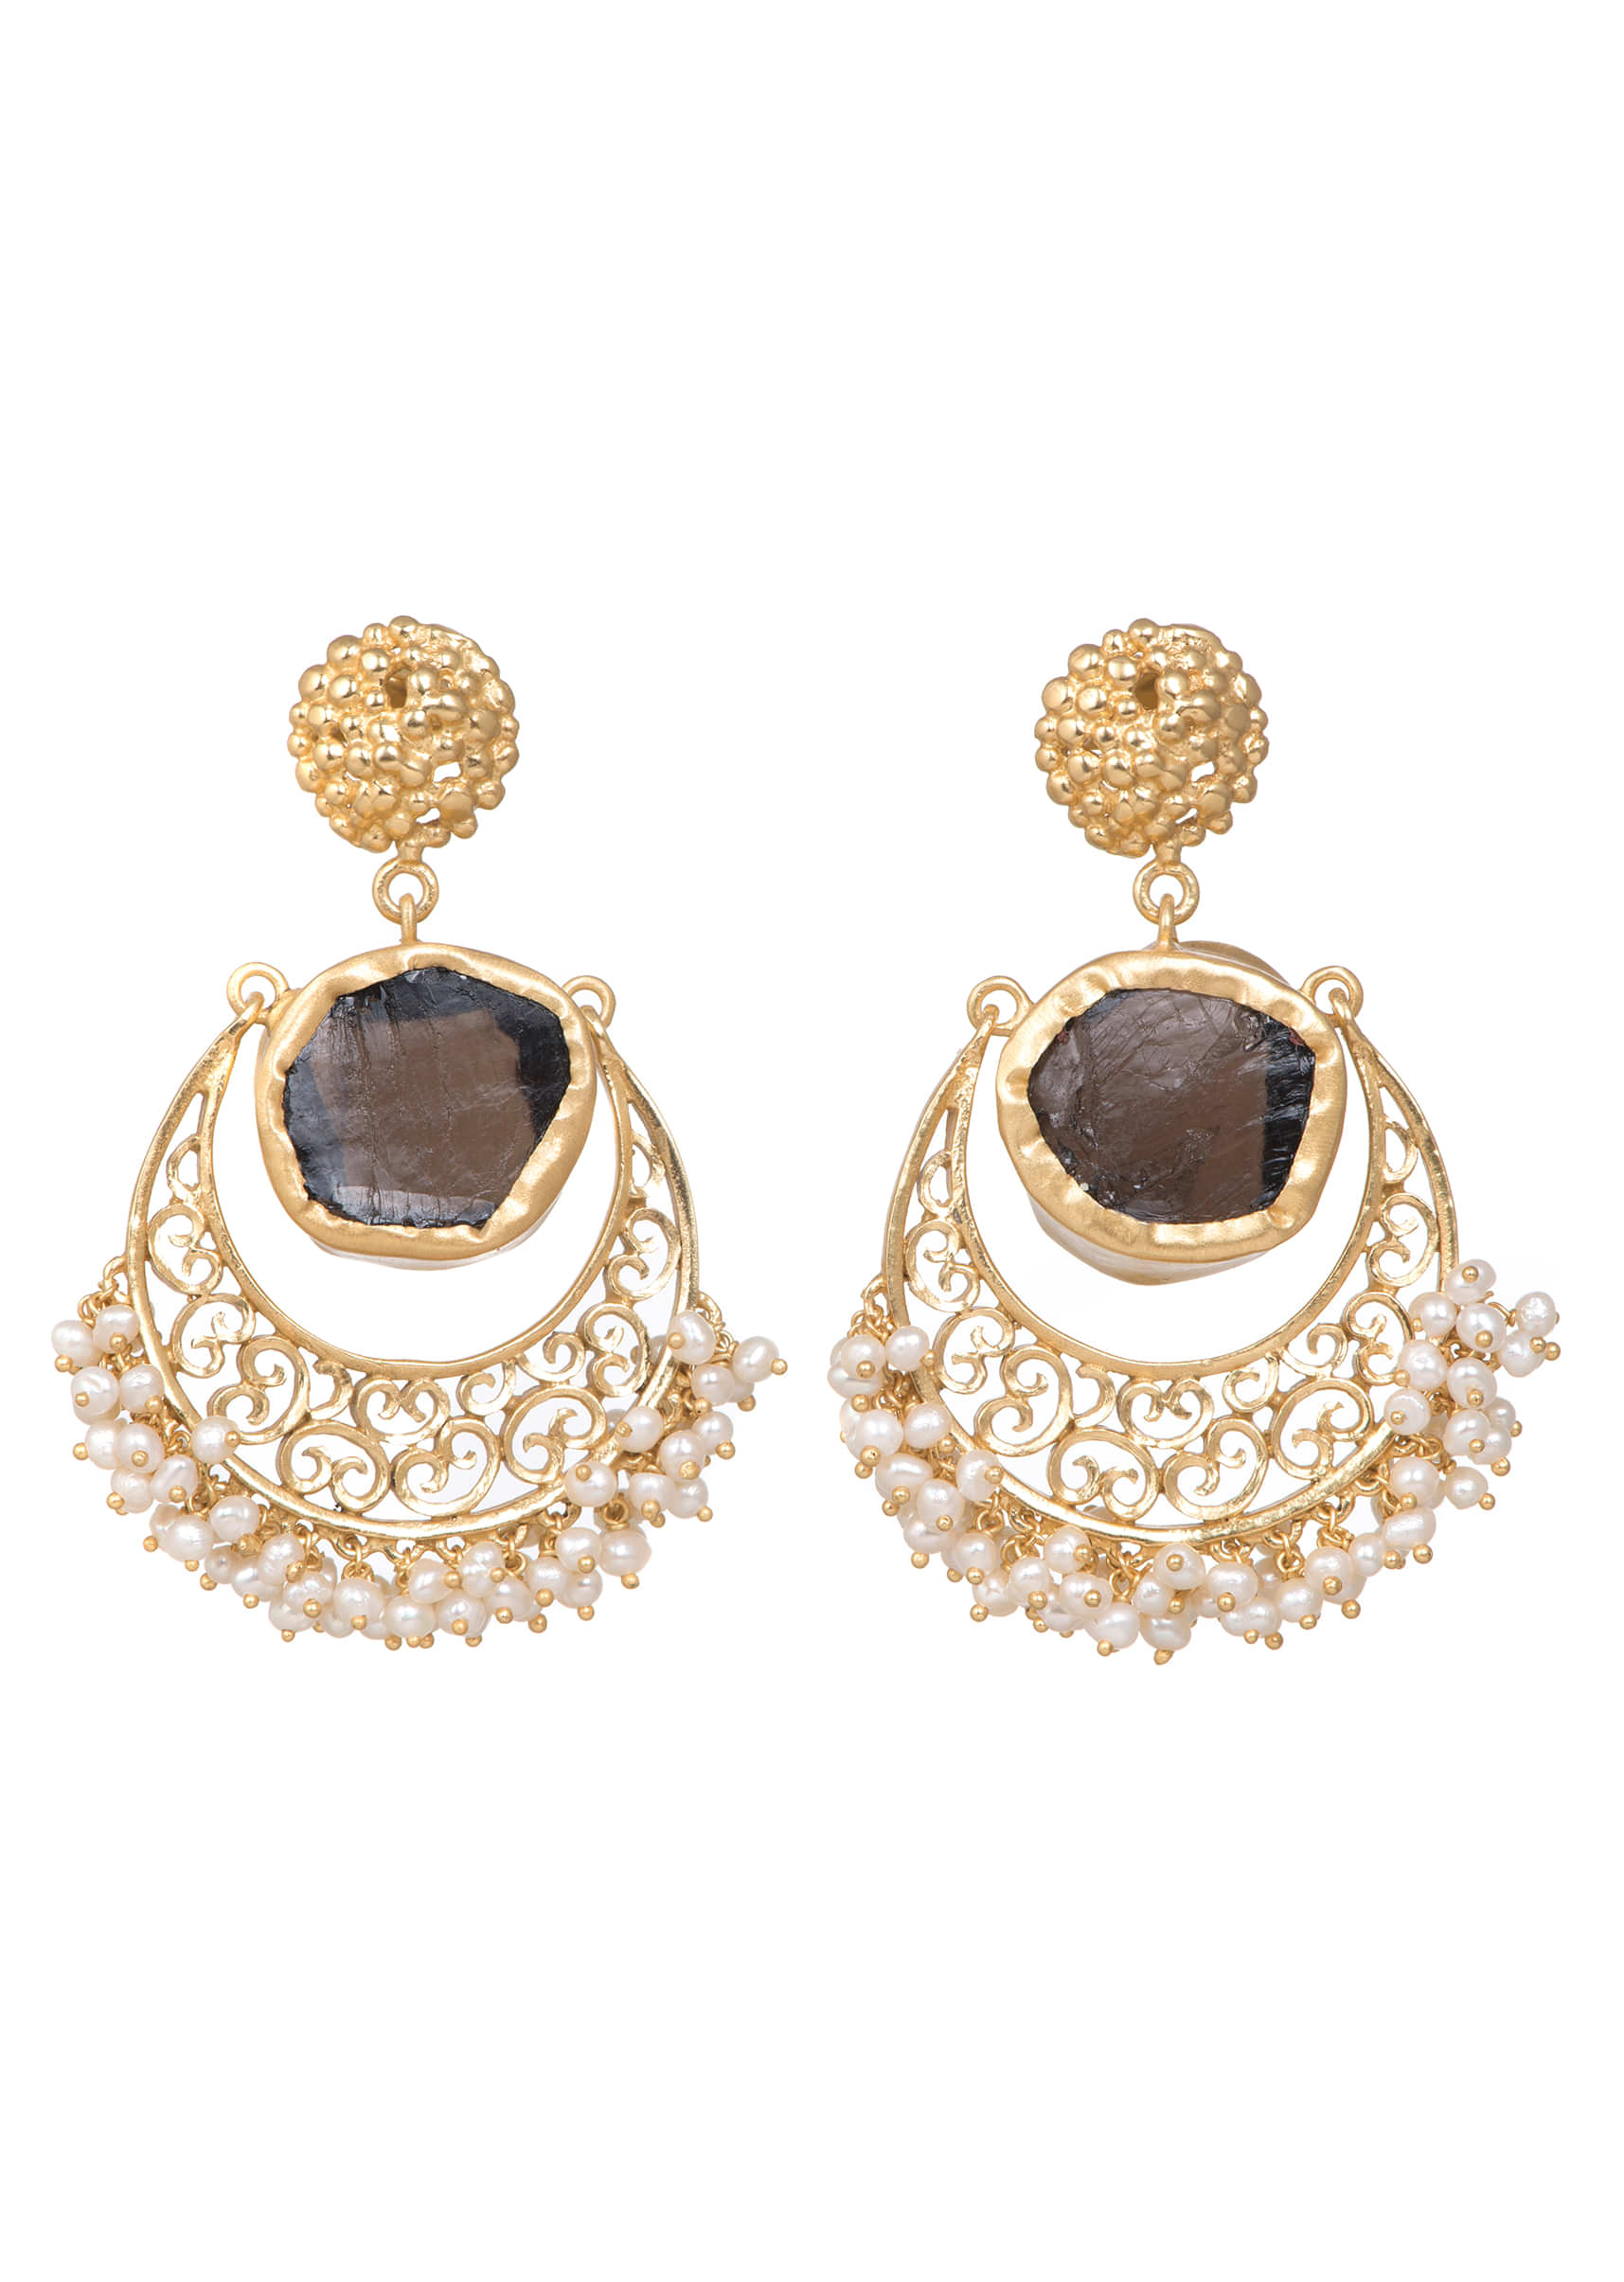 Gold Plated Earrings With Smoky Topaz And Tiny Bits Of Pearls By Zariin